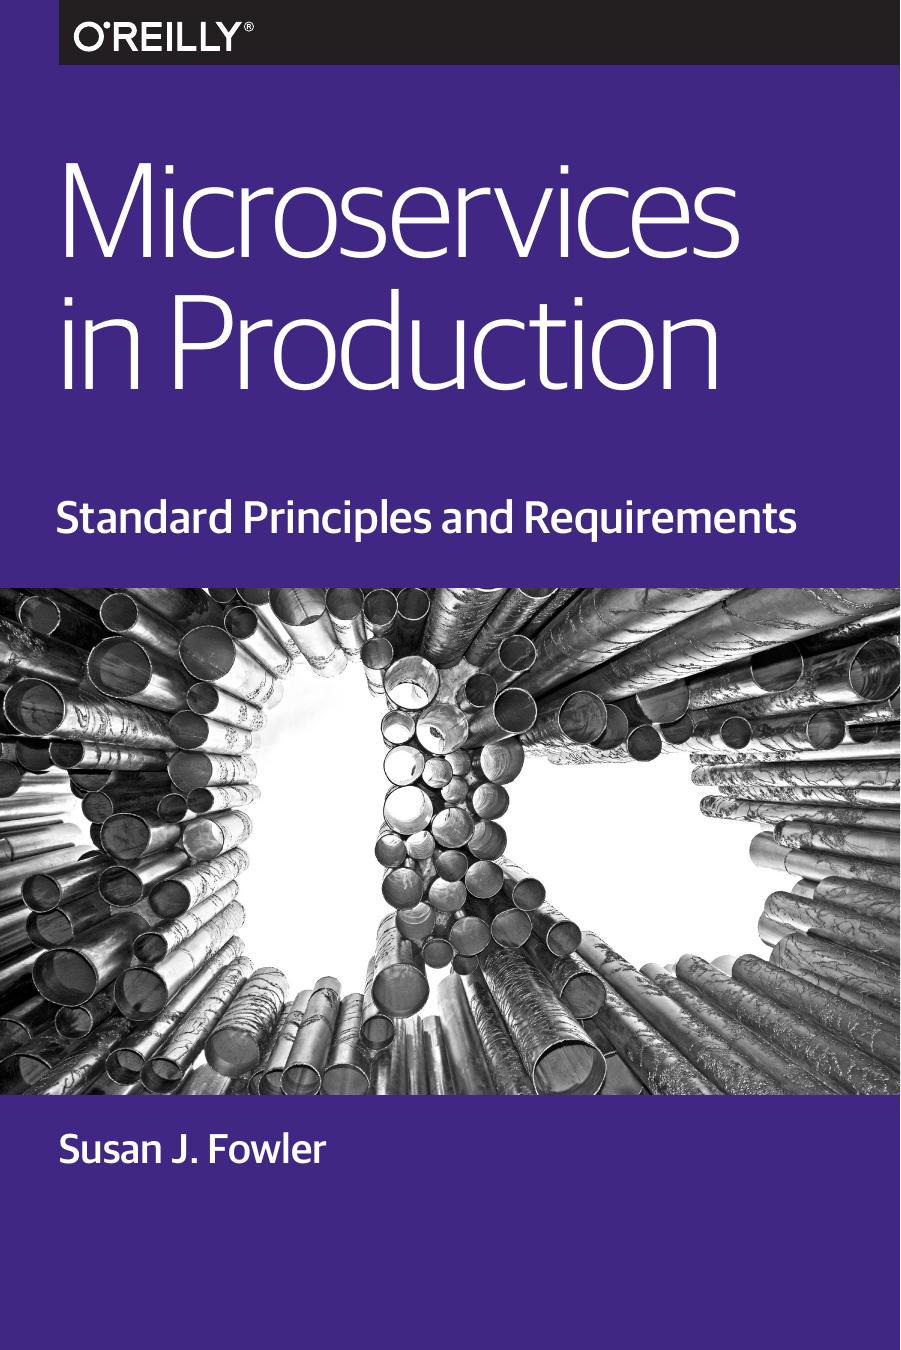 Microservices in Production